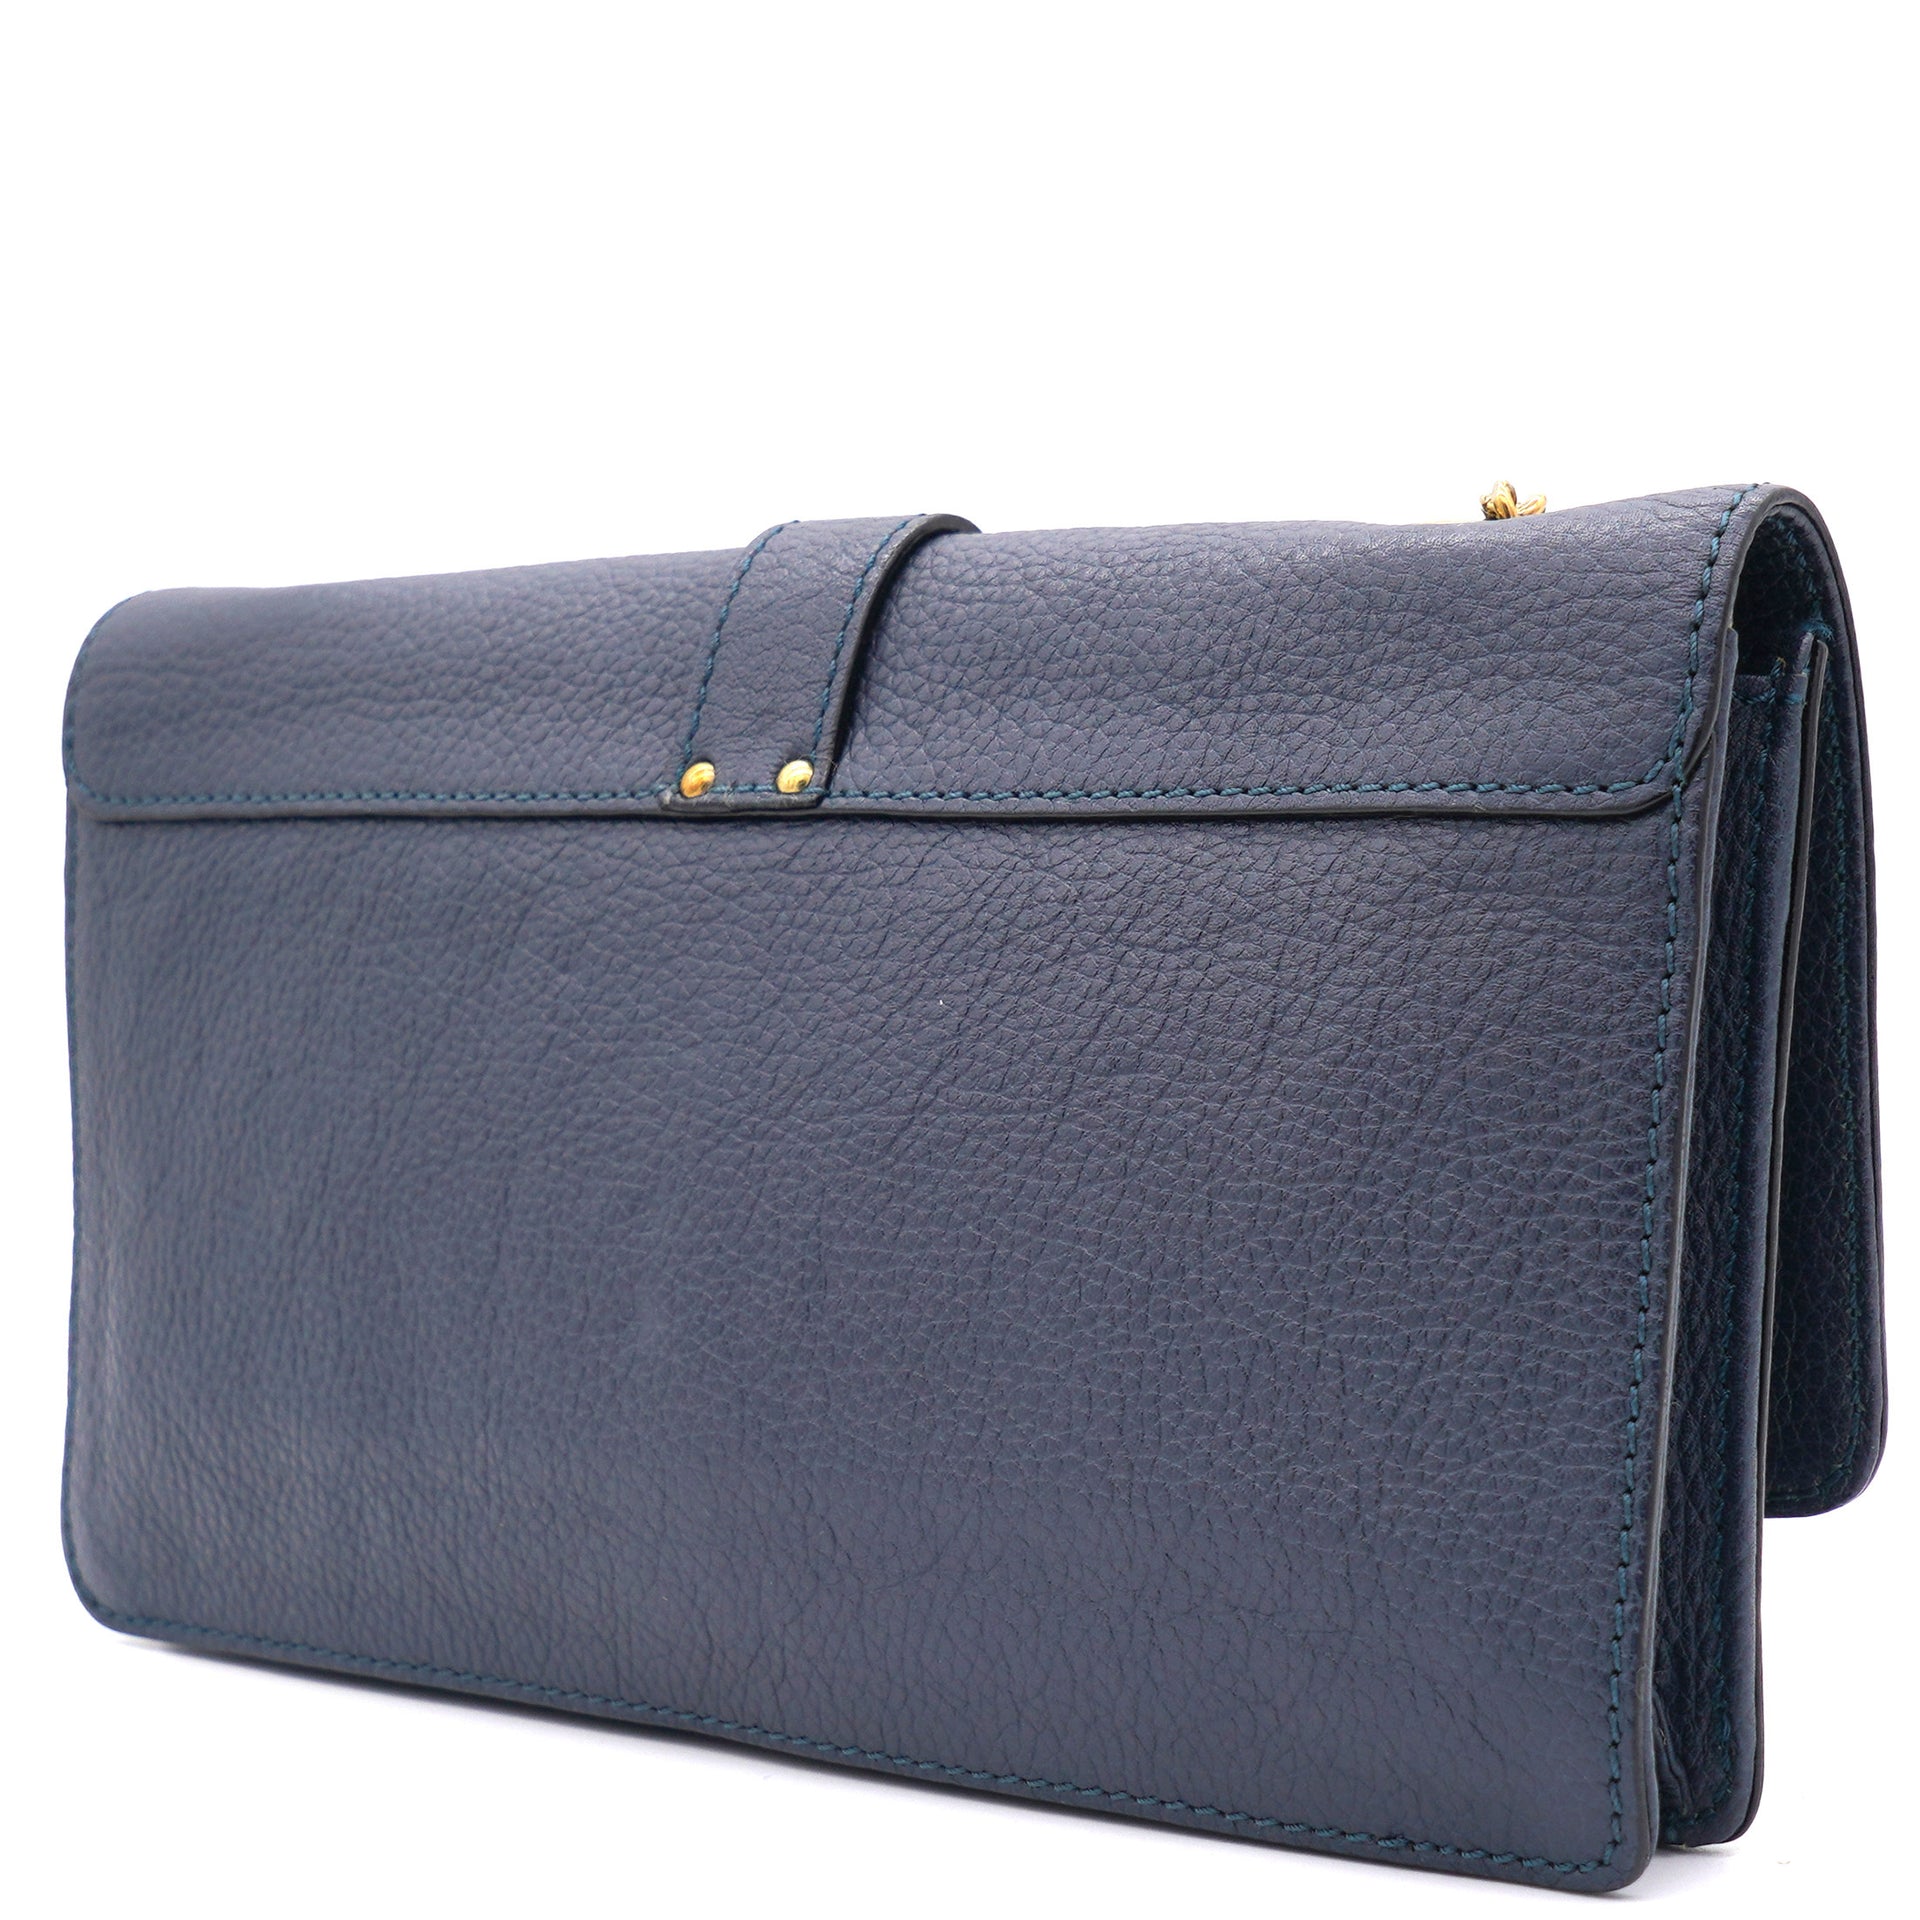 Blue Leather Padlock Chain Clutch